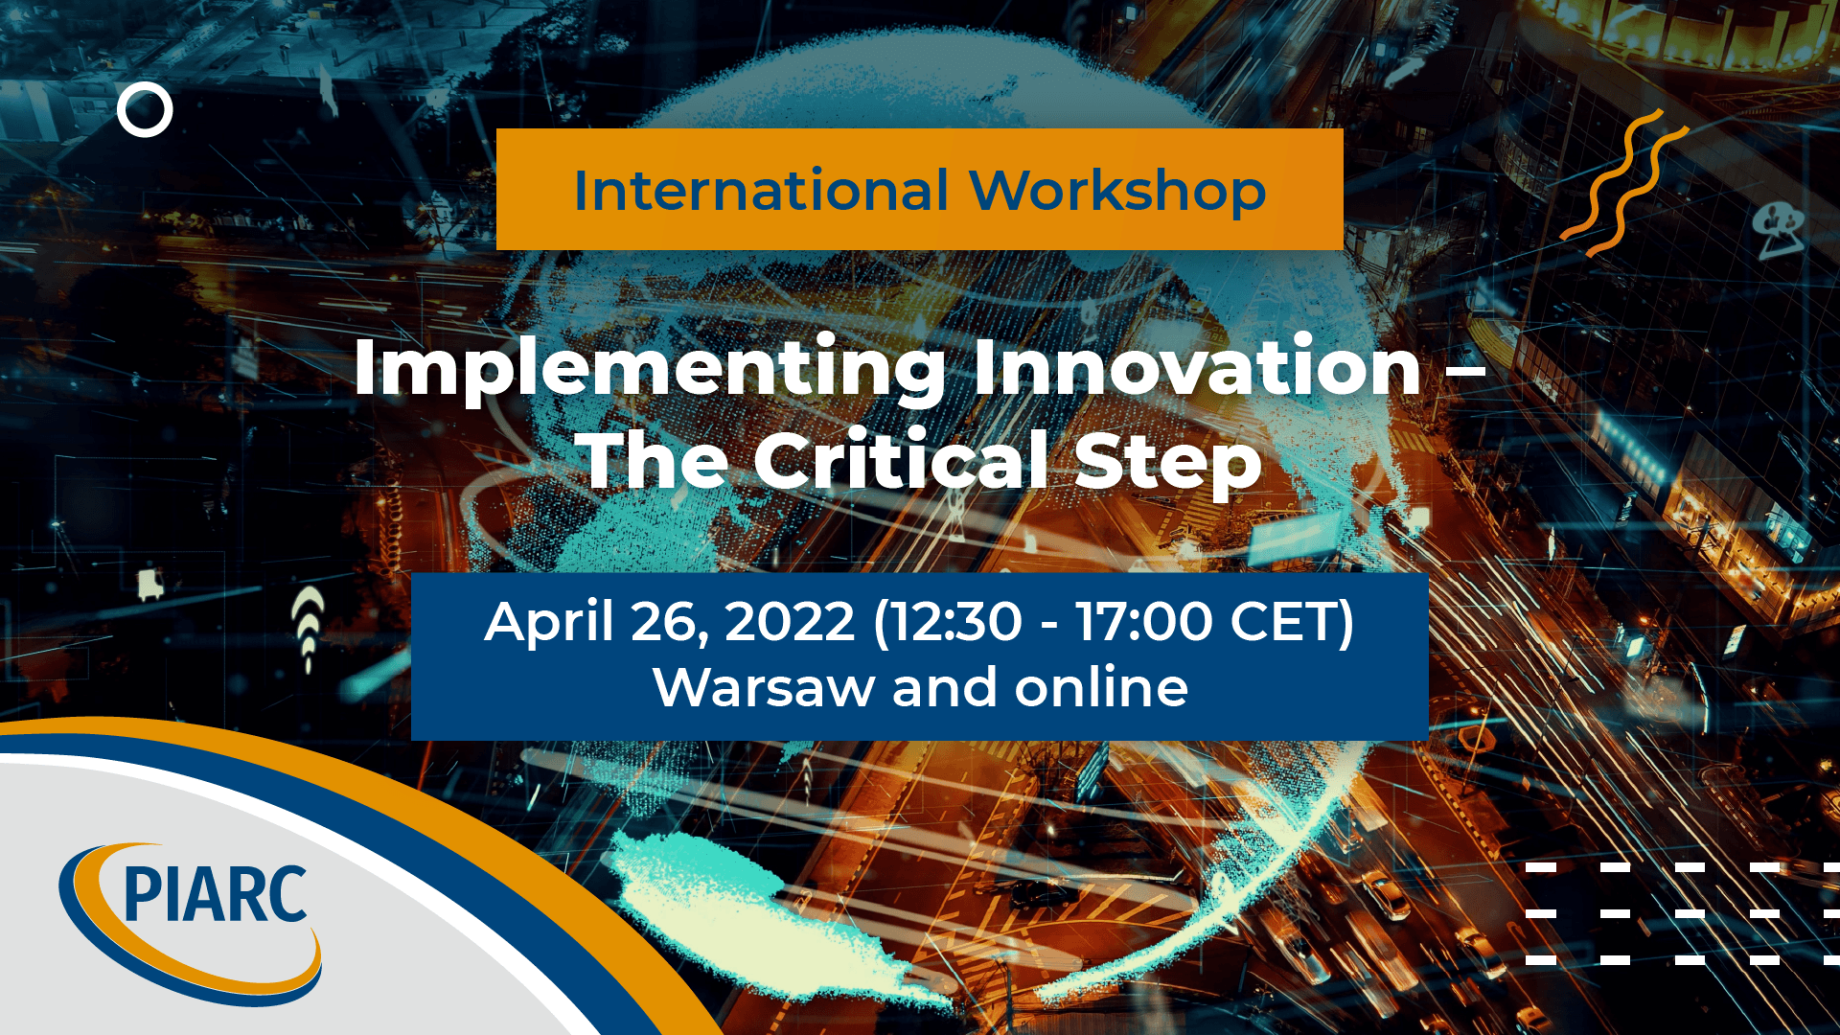 Hurry up and register for the International Workshop "Implementing Innovation - The Critical Step"